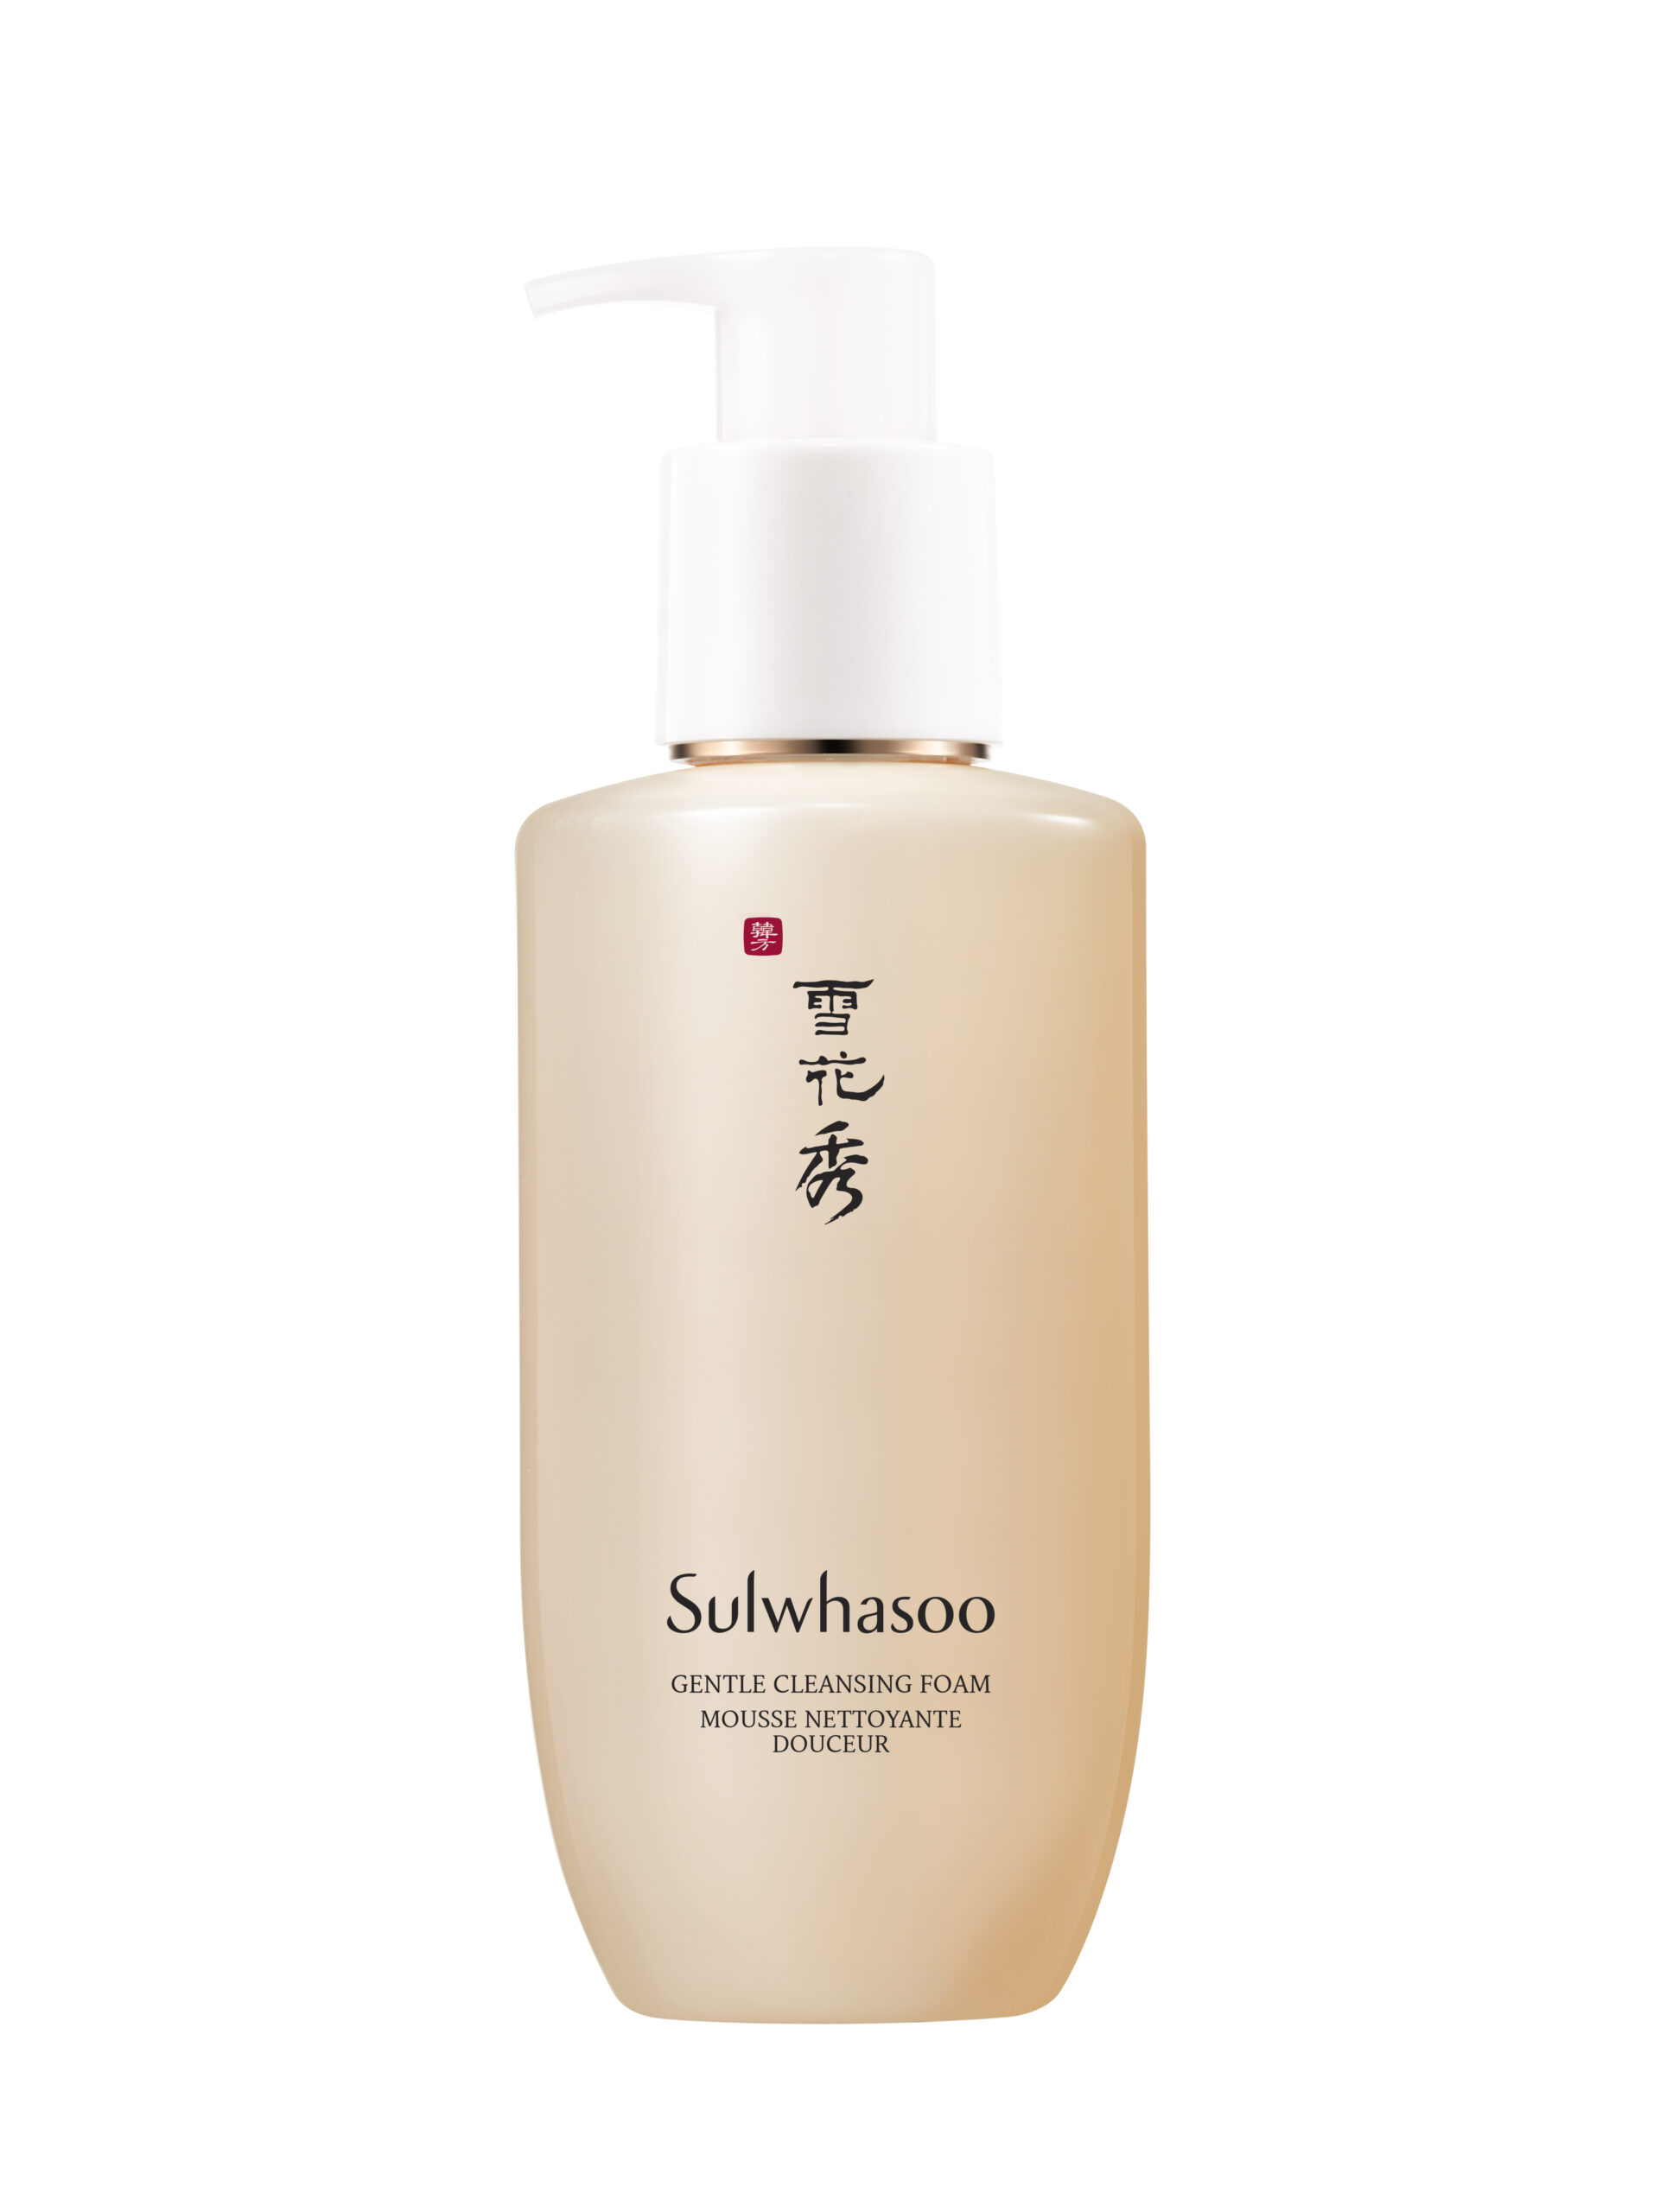 Sulwhasoo Double Cleansing Skincare Range